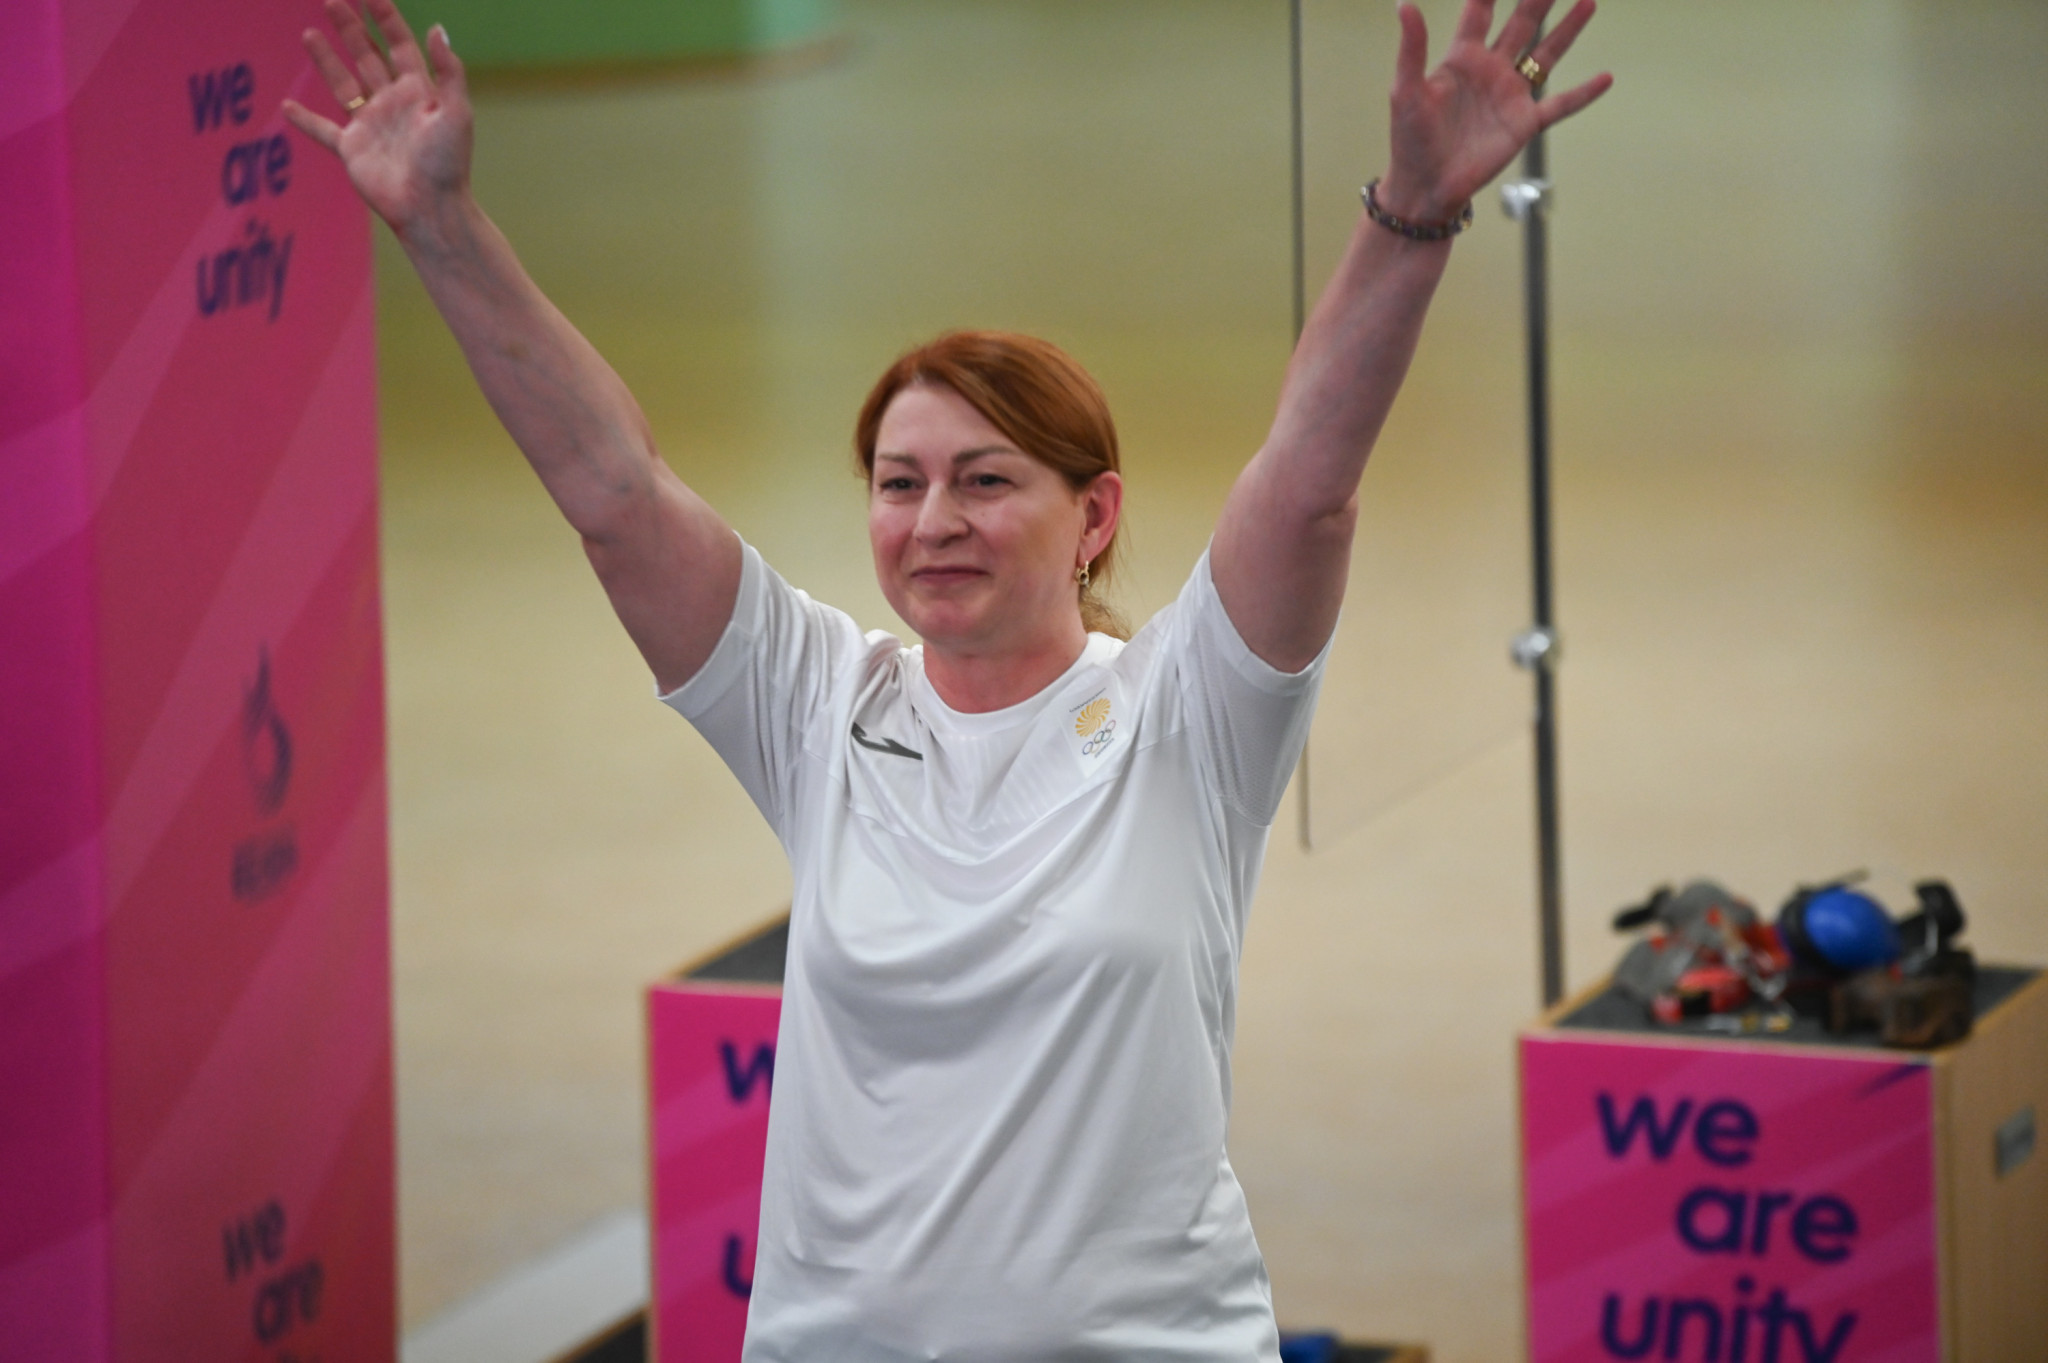 Nino Salukvadze of Georgia finished fourth in the women's 25m pistol final to earn a Paris 2024 quota place which could make her the first woman to appear at 10 Olympic Games ©Kraków-Małopolska 2023